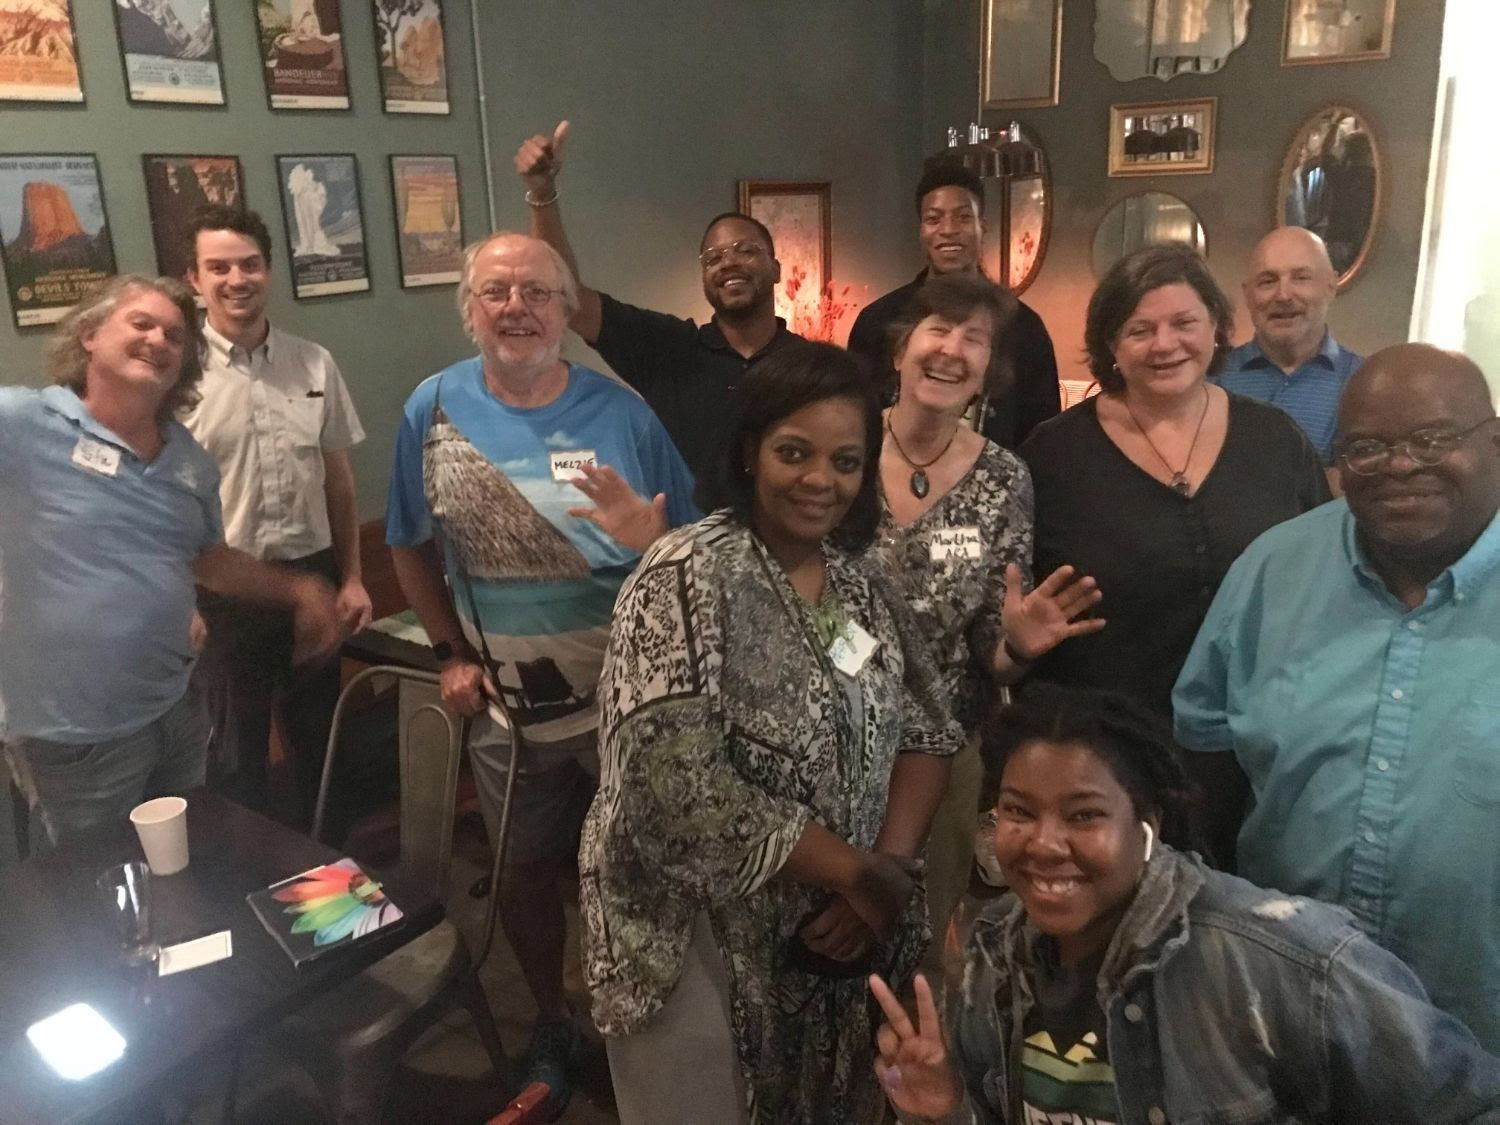 Martha meets with the new Friends of the Alabama River in Montgomery